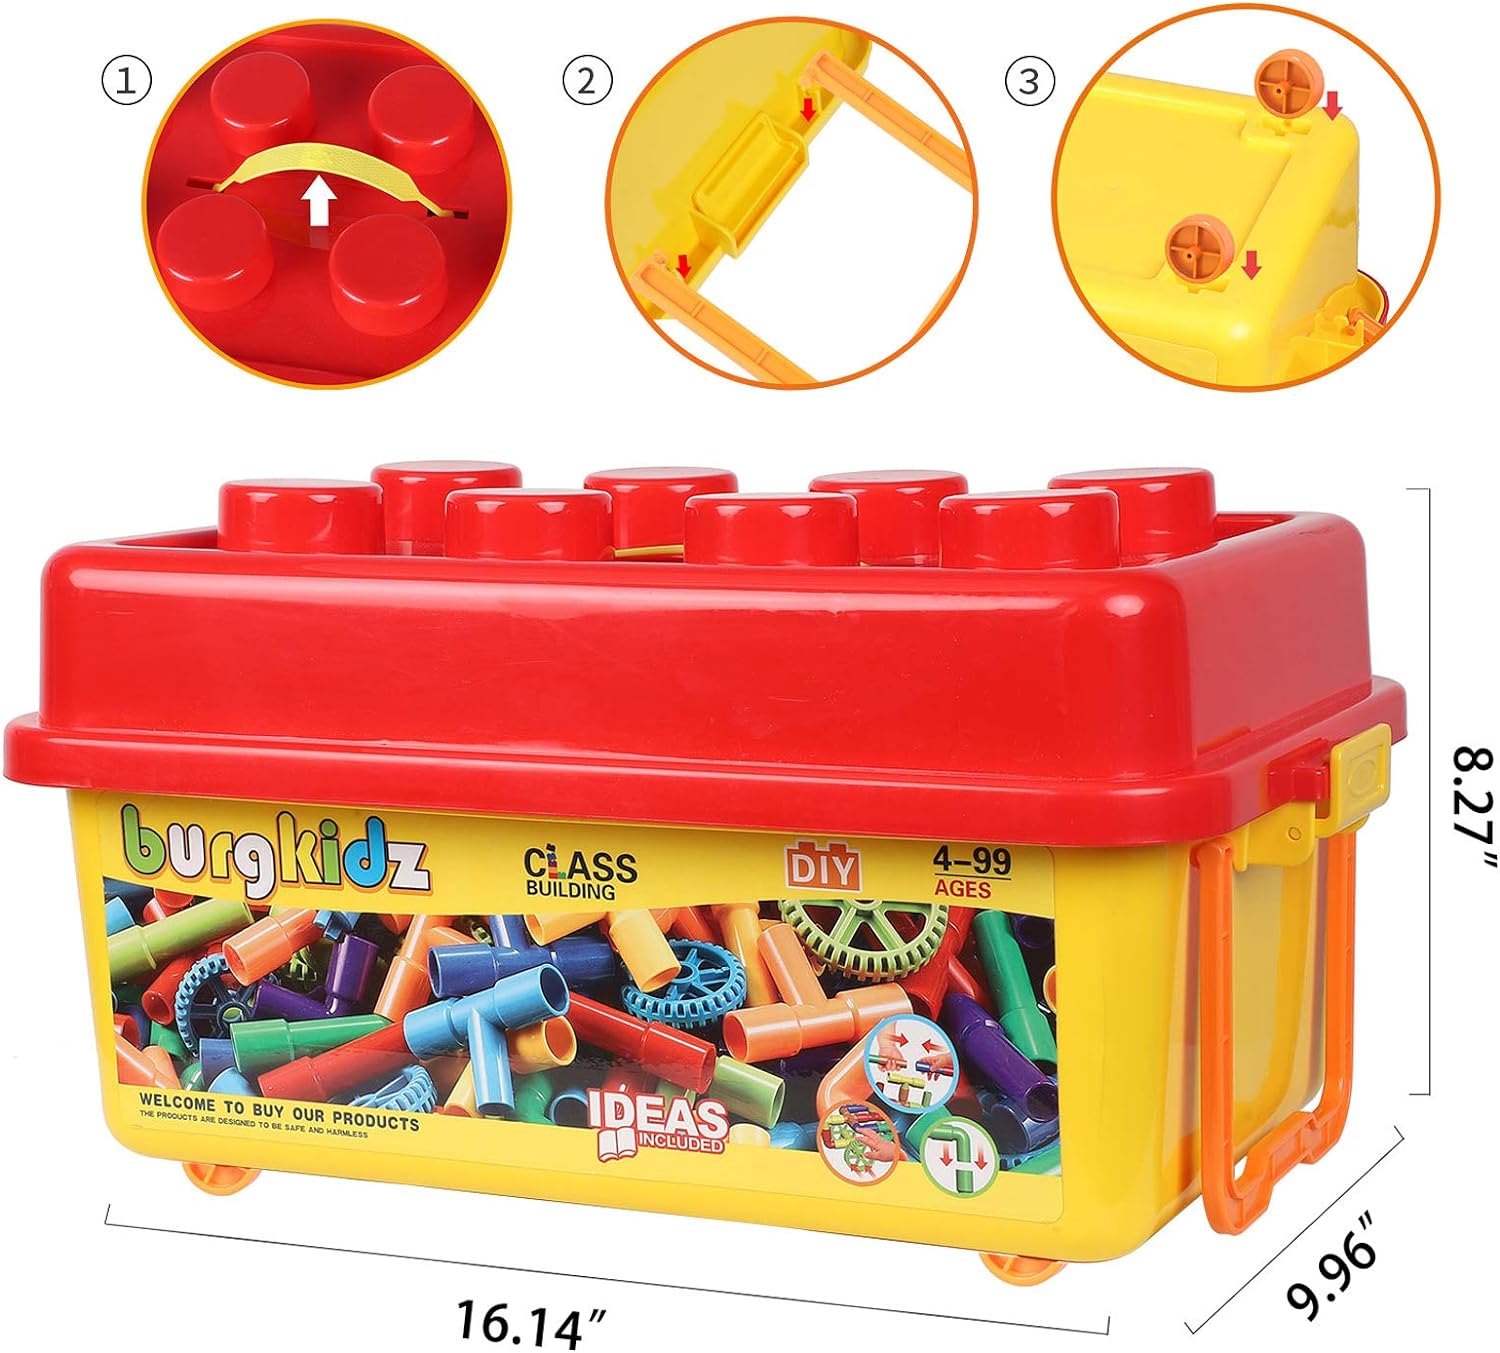 burgkidz Building Blocks STEM Pipe Tube Learning Toys Birthday Gifts, Educational Autistic Toy Compatible Building Pipeworks Constructions for Kids Boys Girls Ages 3 4 5 6 7 8+